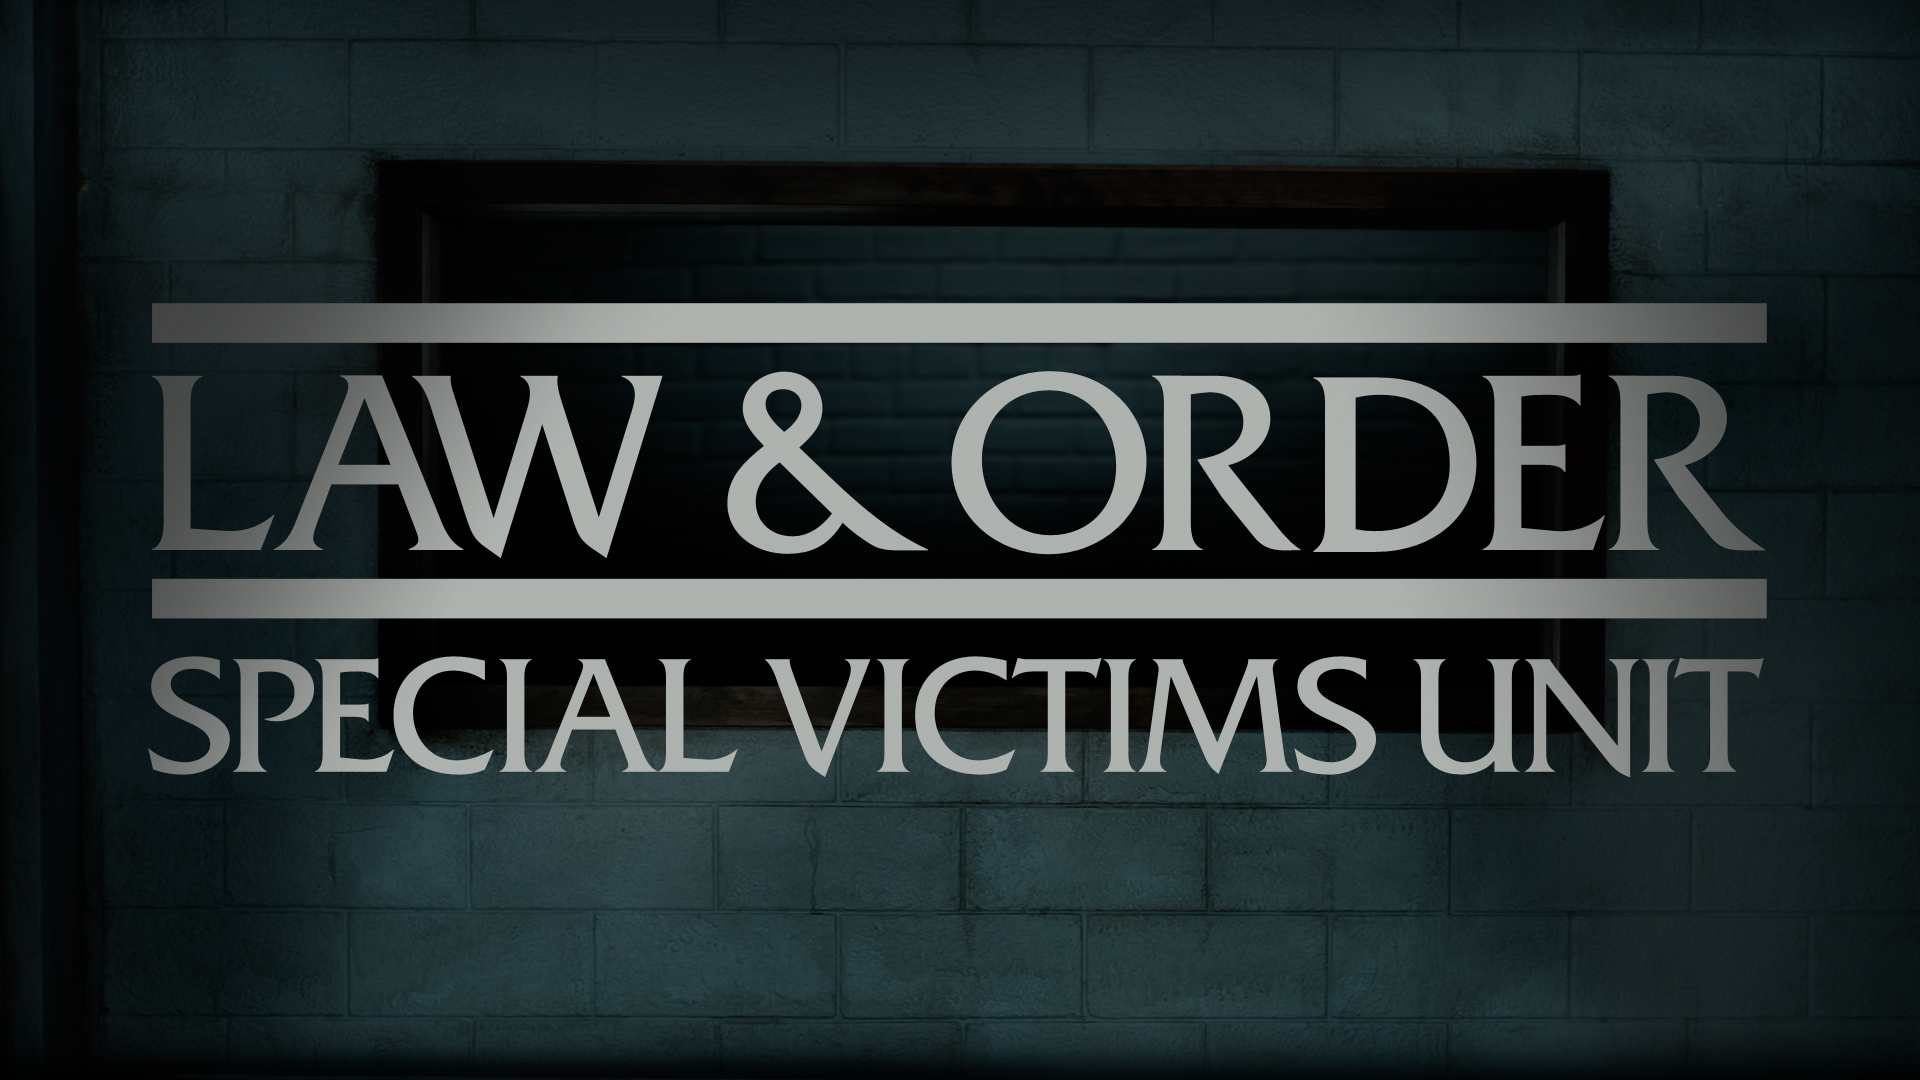 Steam law and order фото 31